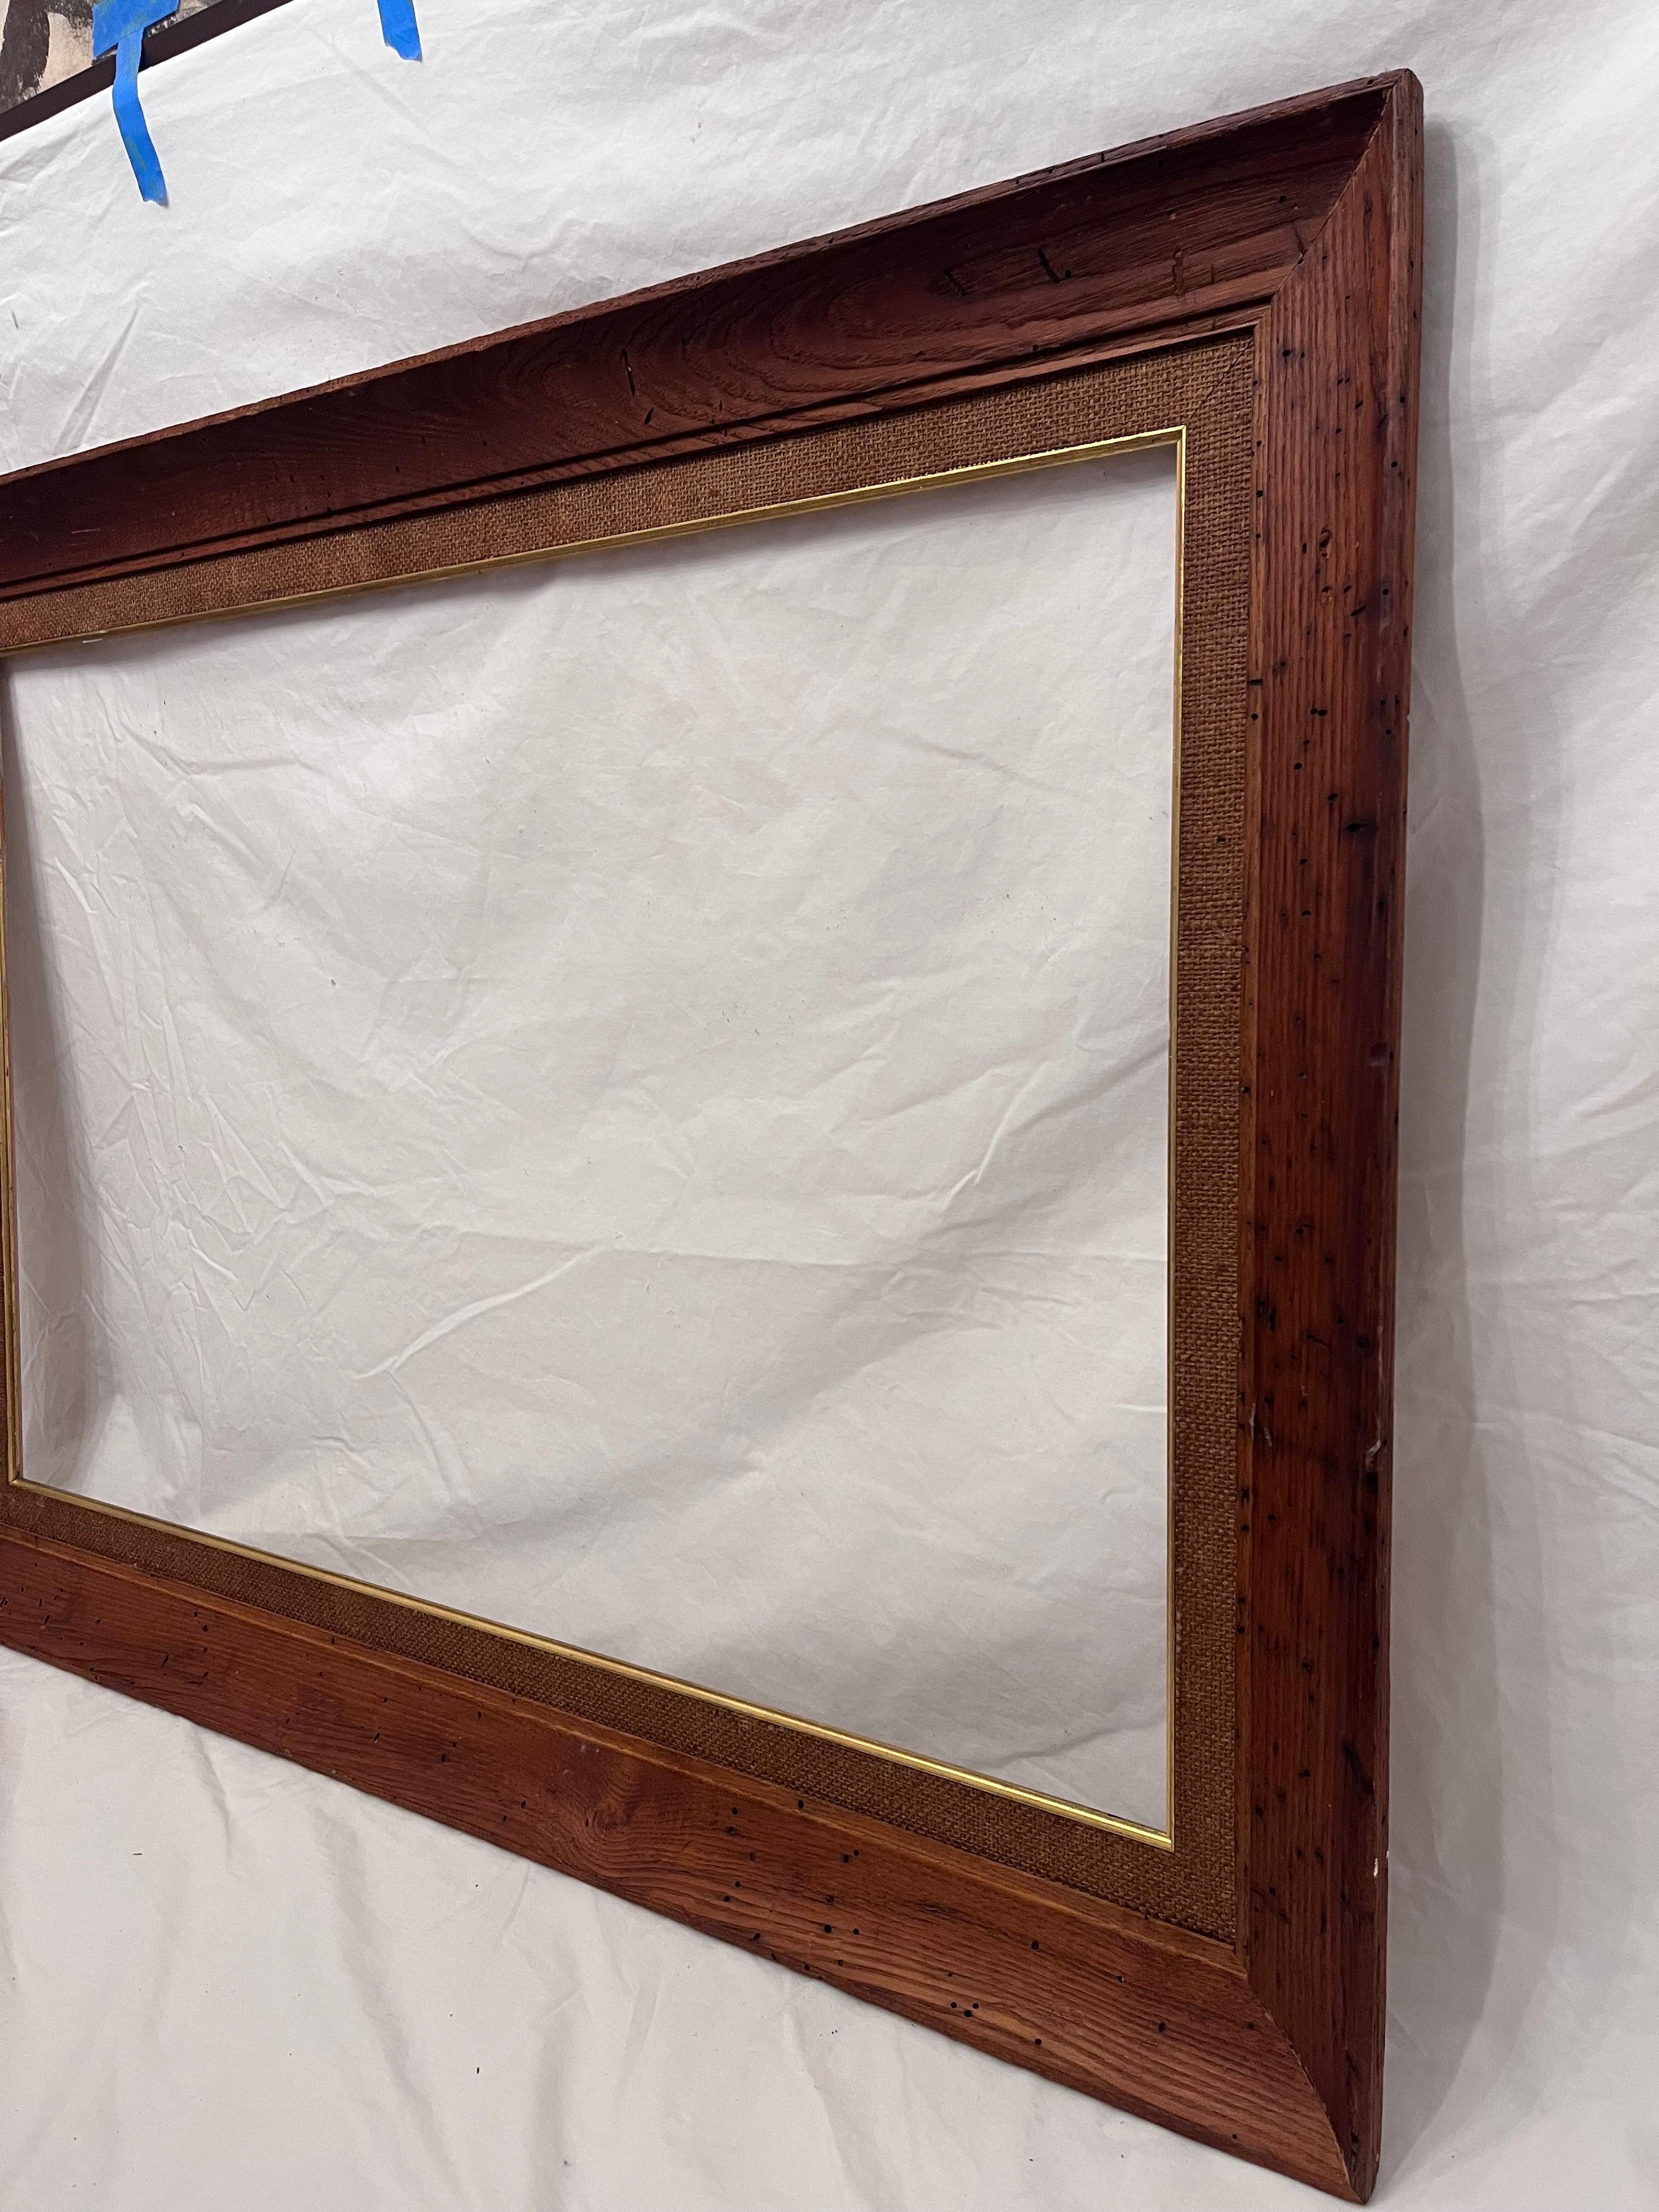 American Mid 20th Century Large Wormy Chestnut Modernist Style Picture Frame 36 x 24 For Sale